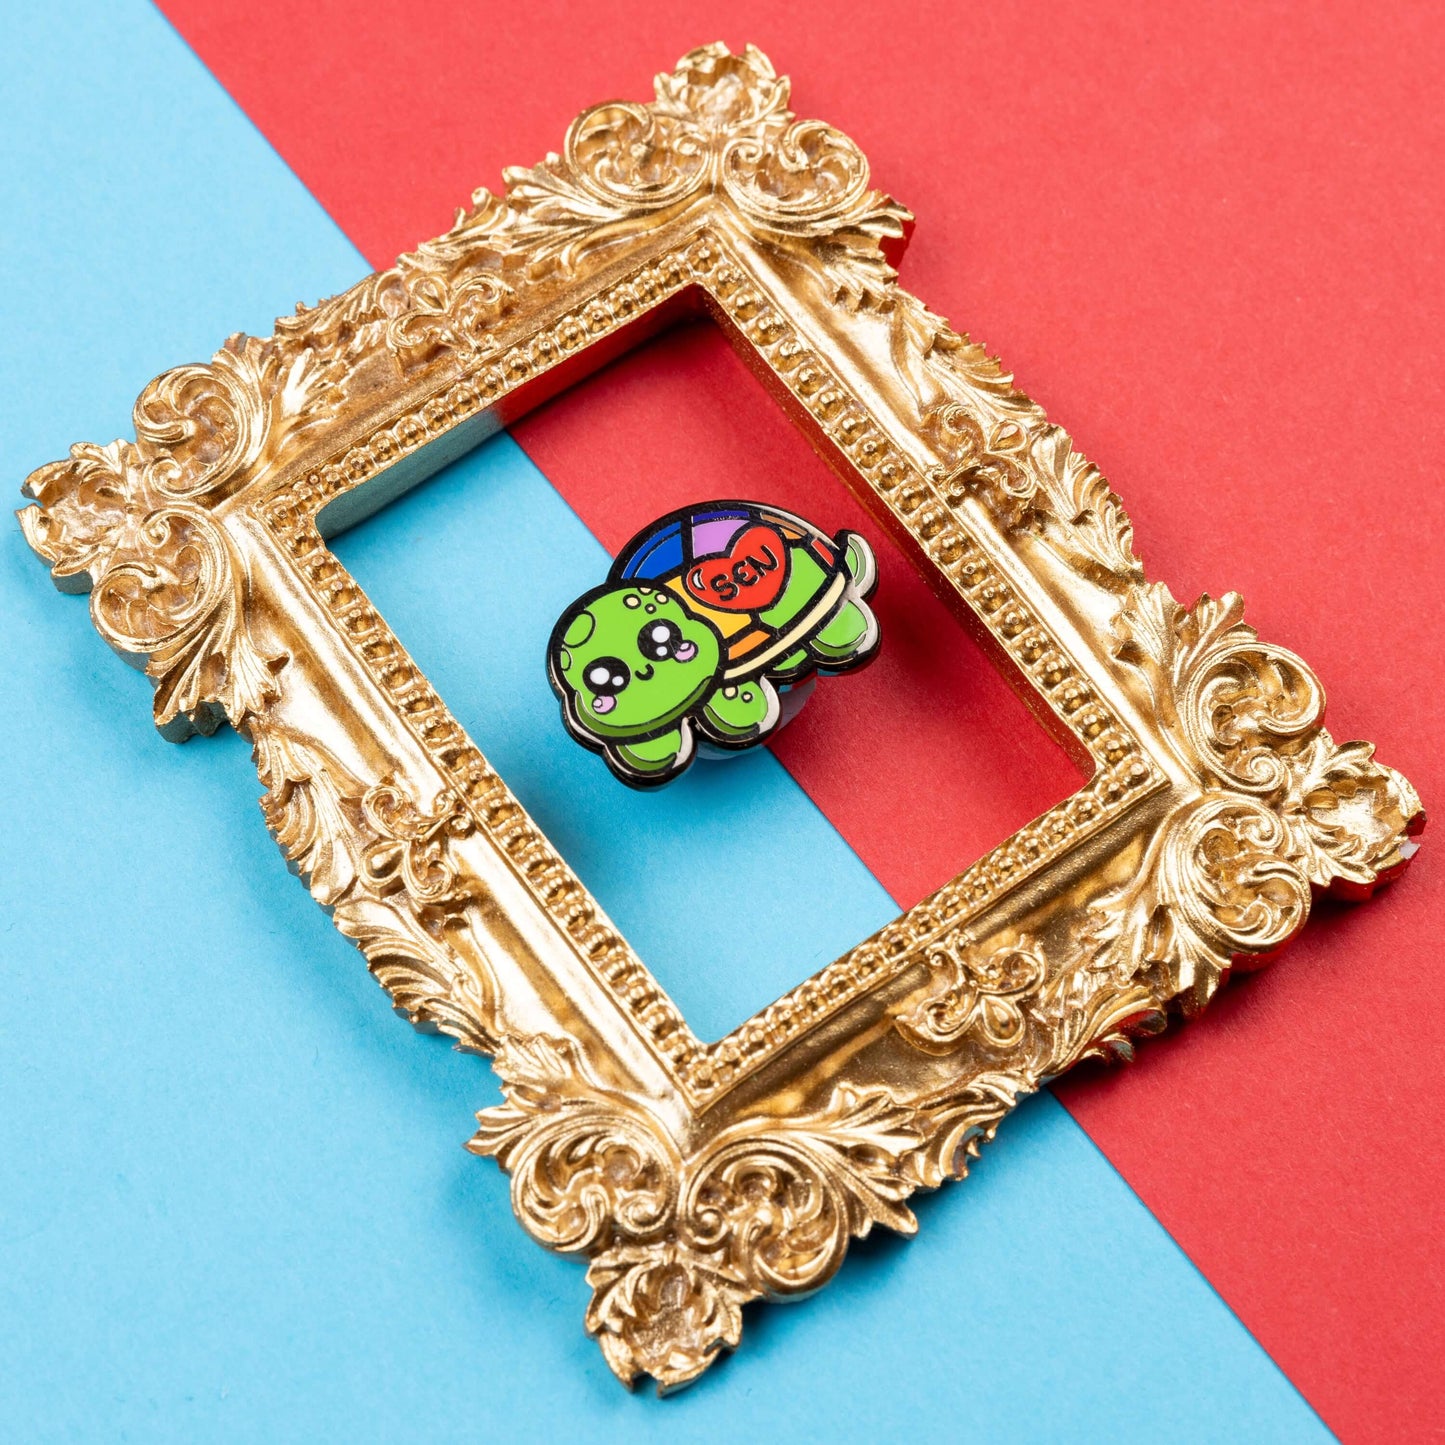 The Speshell Educational Needs Enamel Pin - SEN - Special Educational Needs on a red and blue background in a gold ornate frame. A rainbow shell kawaii cute style tortoise with pink cheeks and sparkling eyes, on its shell is a red heart with 'SEN' in the middle. The pin design is raising awareness for SEN Special Educational Needs.